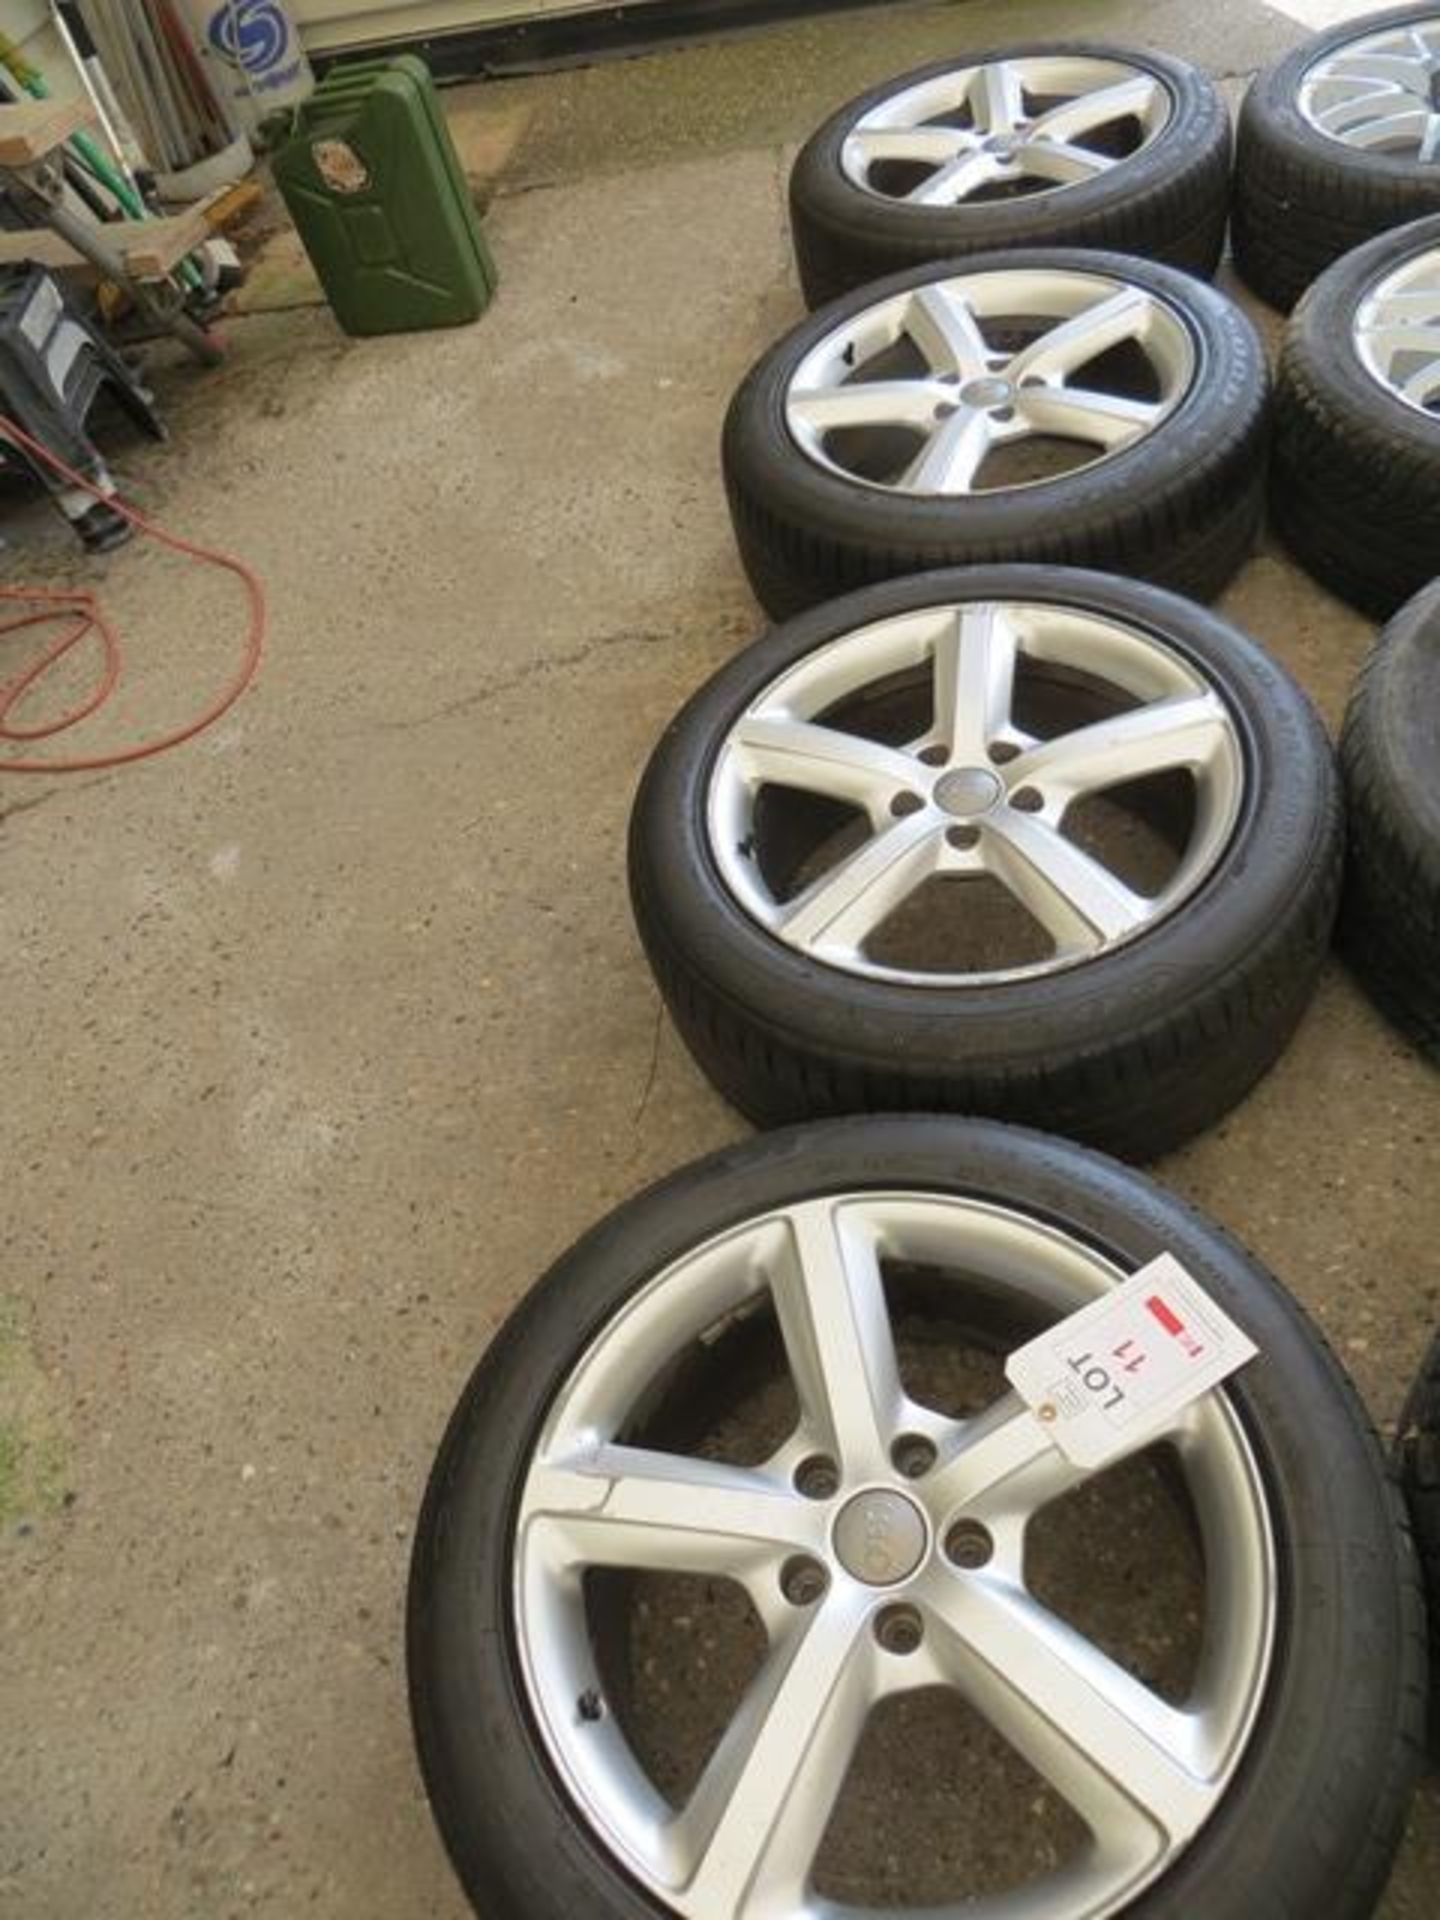 Set of 4 Audi alloy wheels SUV 20" with tyres - Image 2 of 3